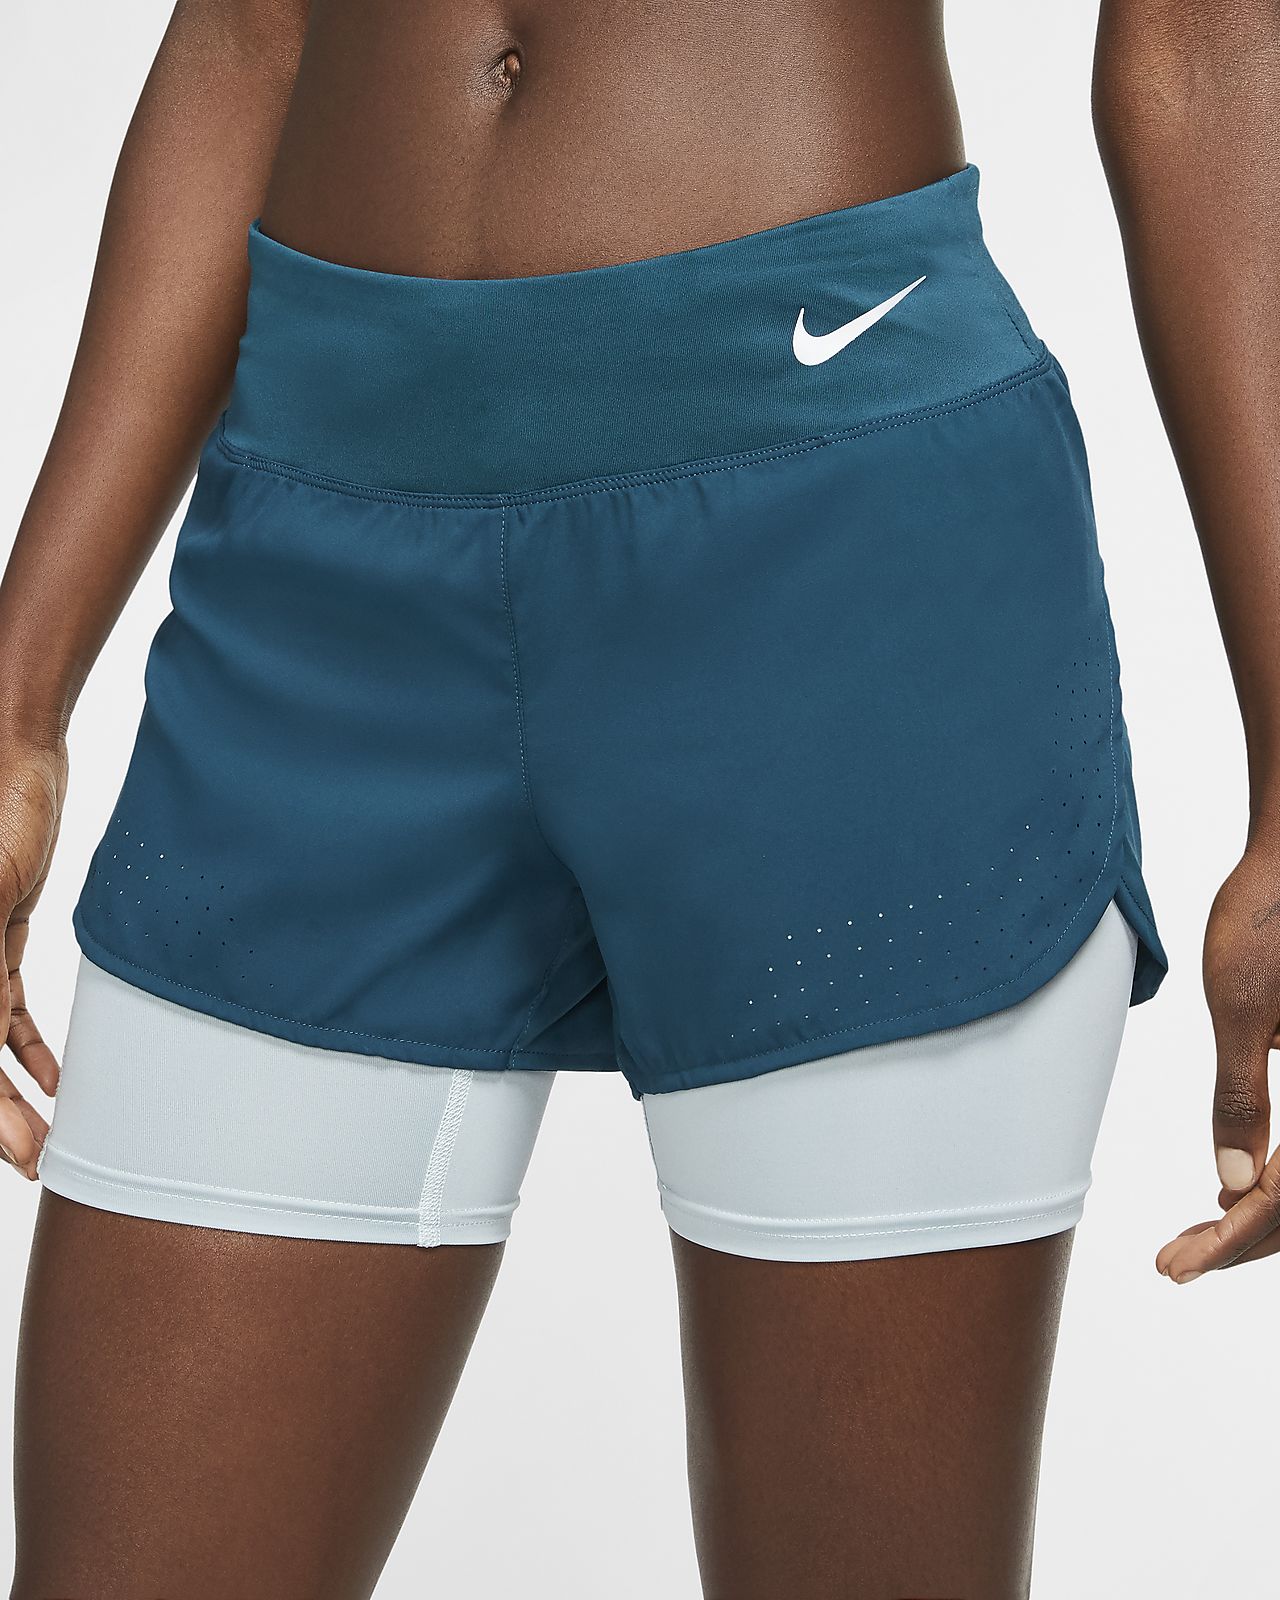 Benefits Of 2 In 1 Running Shorts For Women